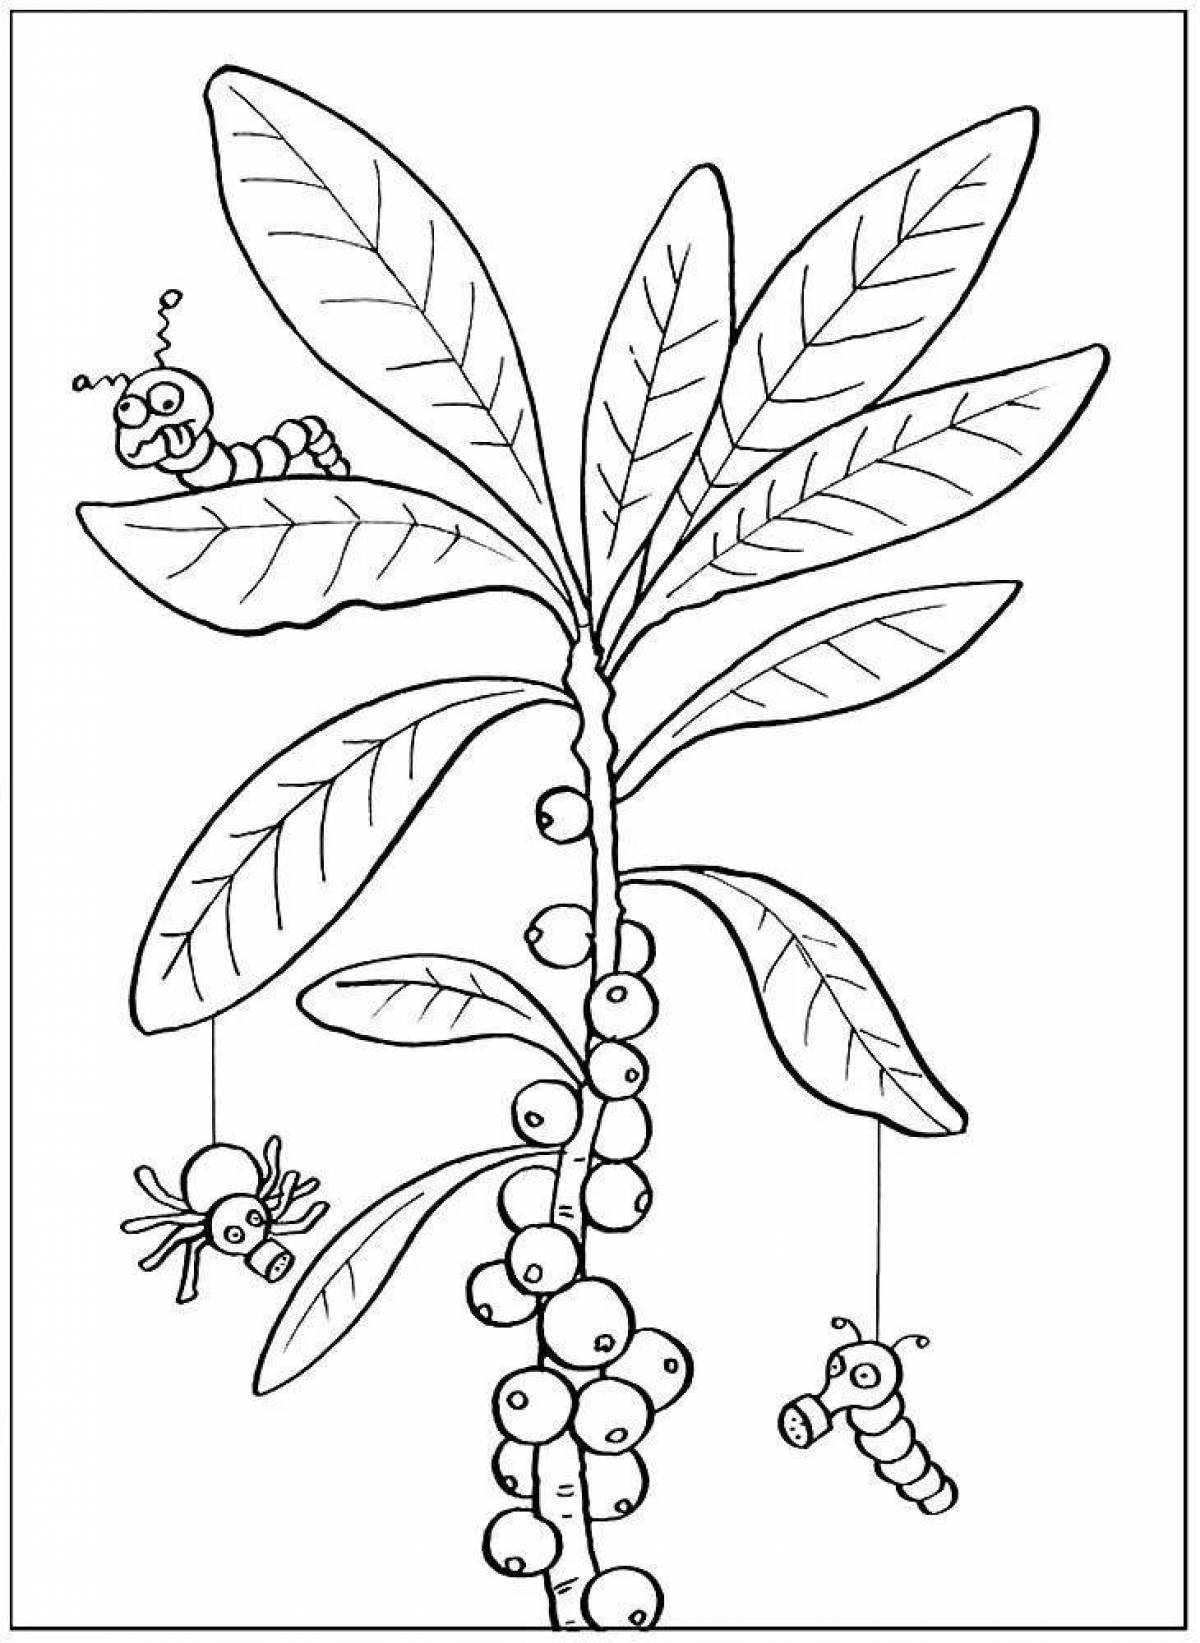 Effective painting of poisonous plants